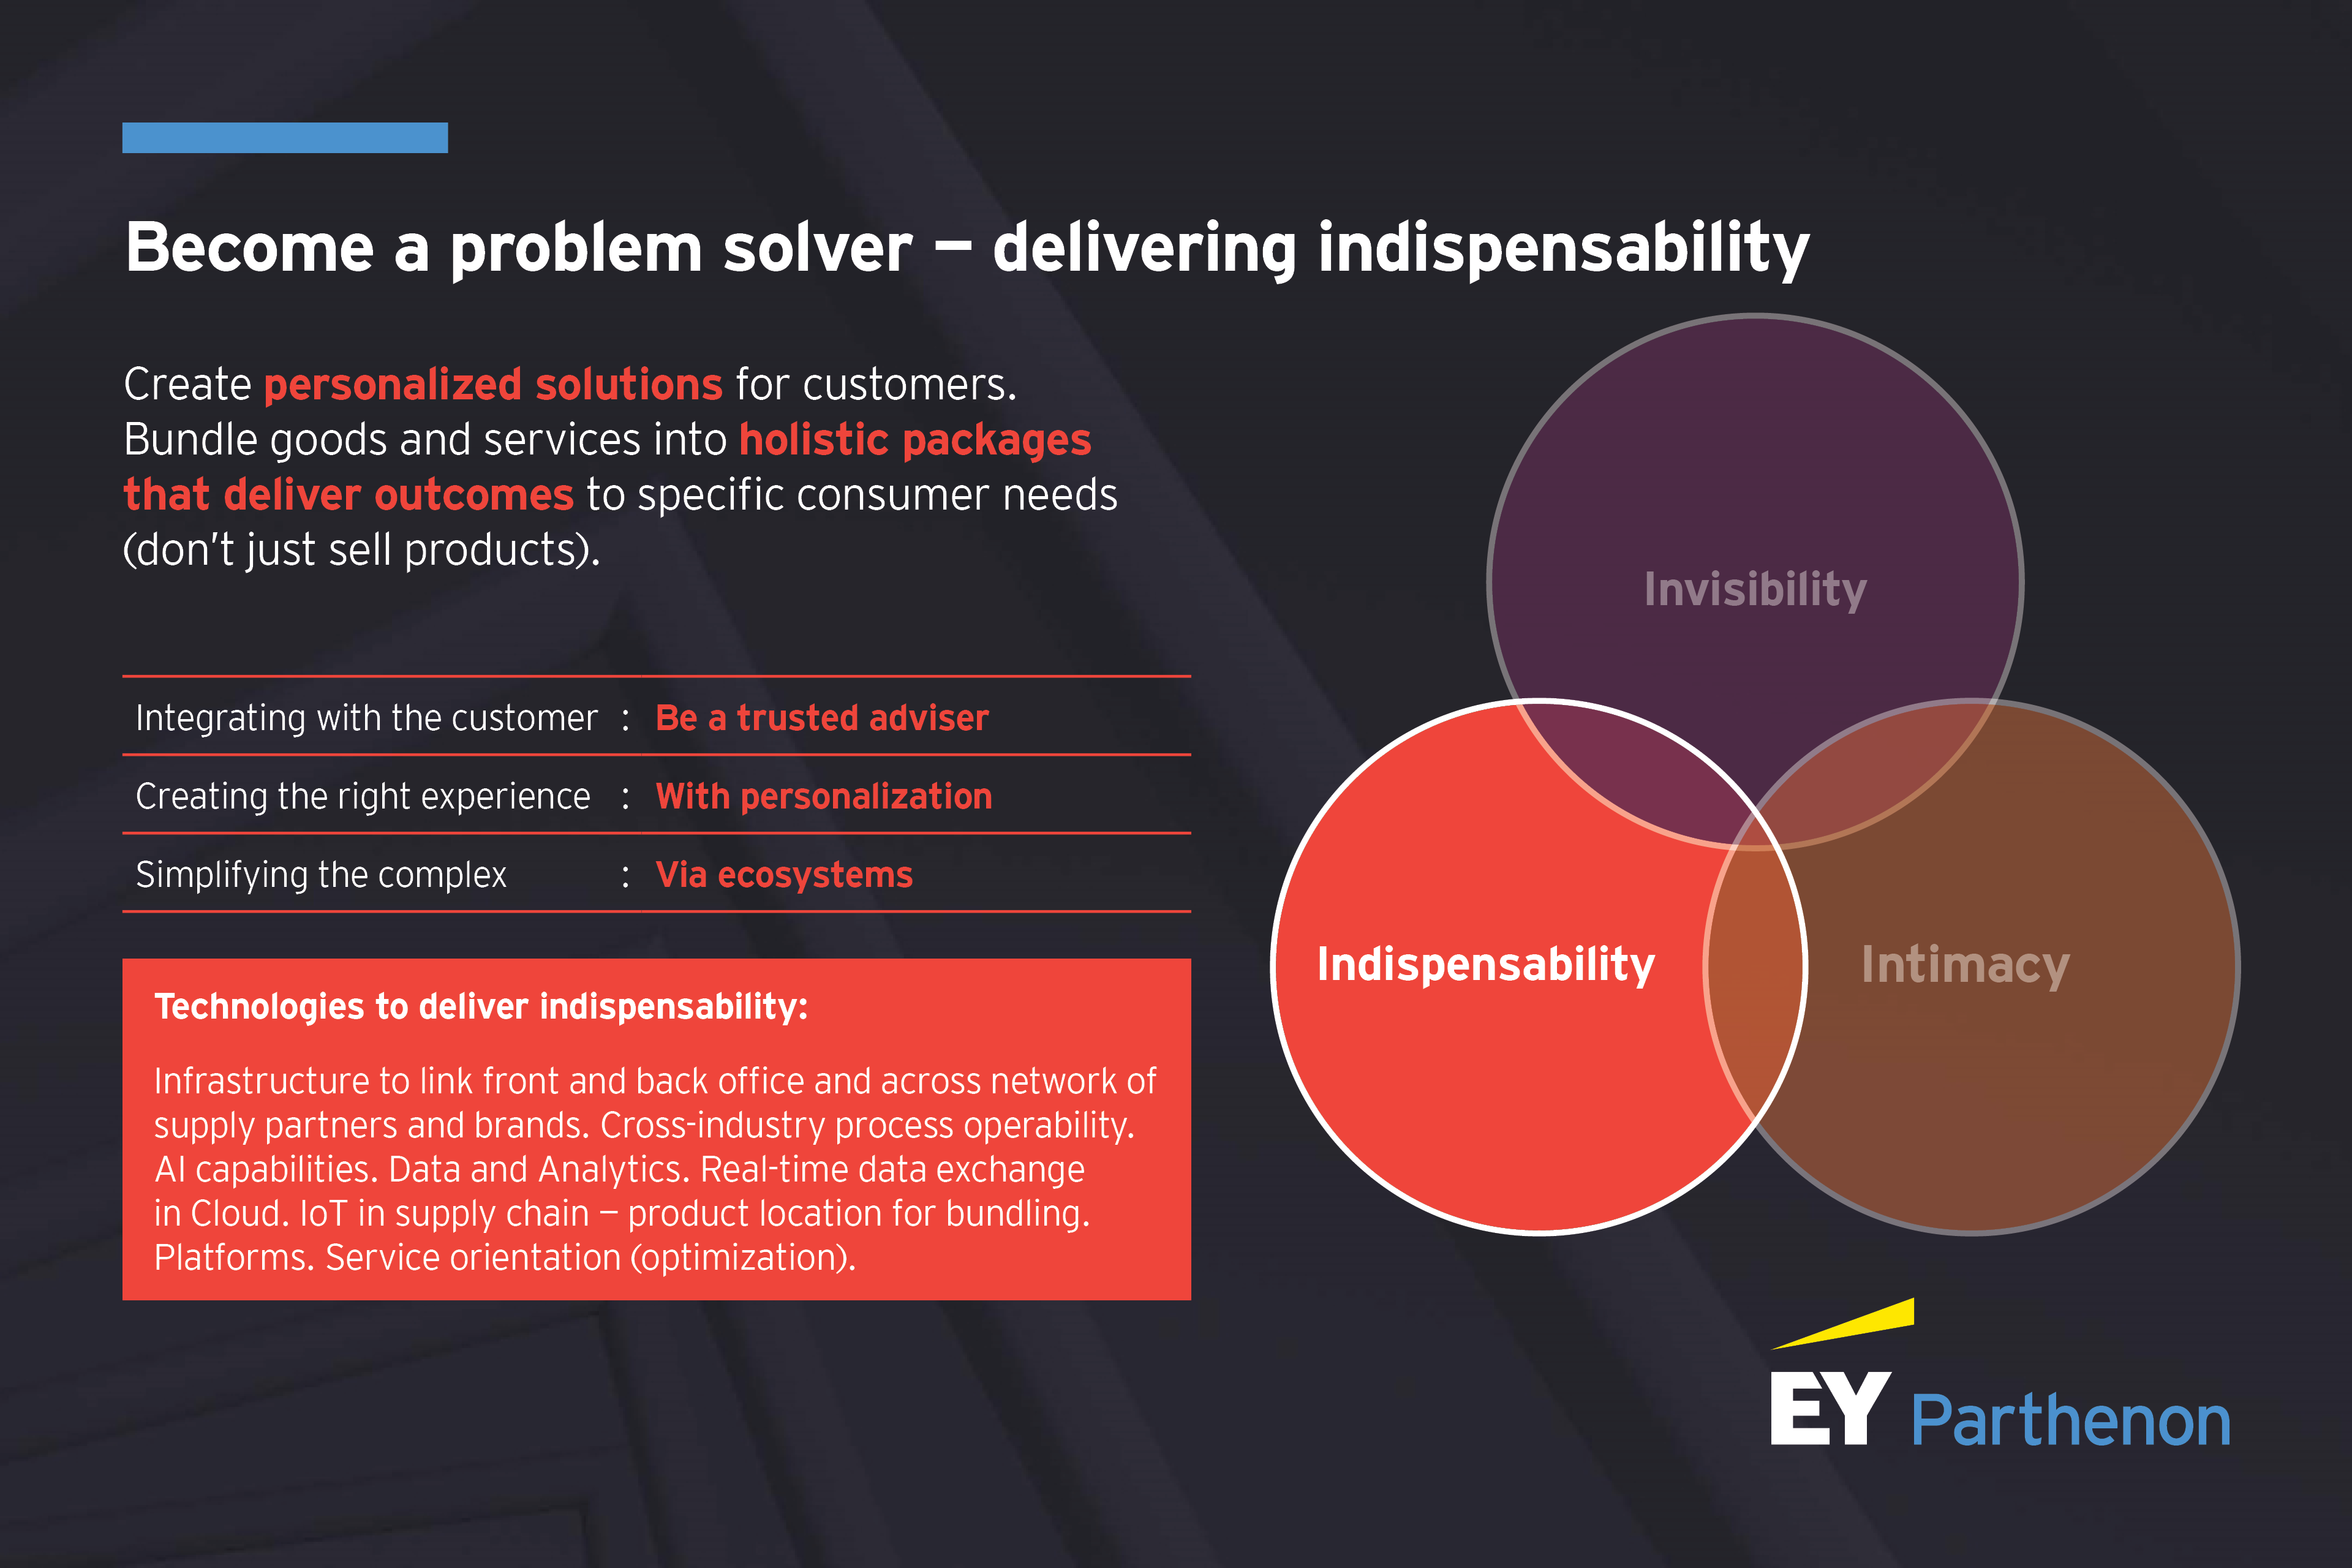 Become a problem solver: How retailers can deliver indispensability